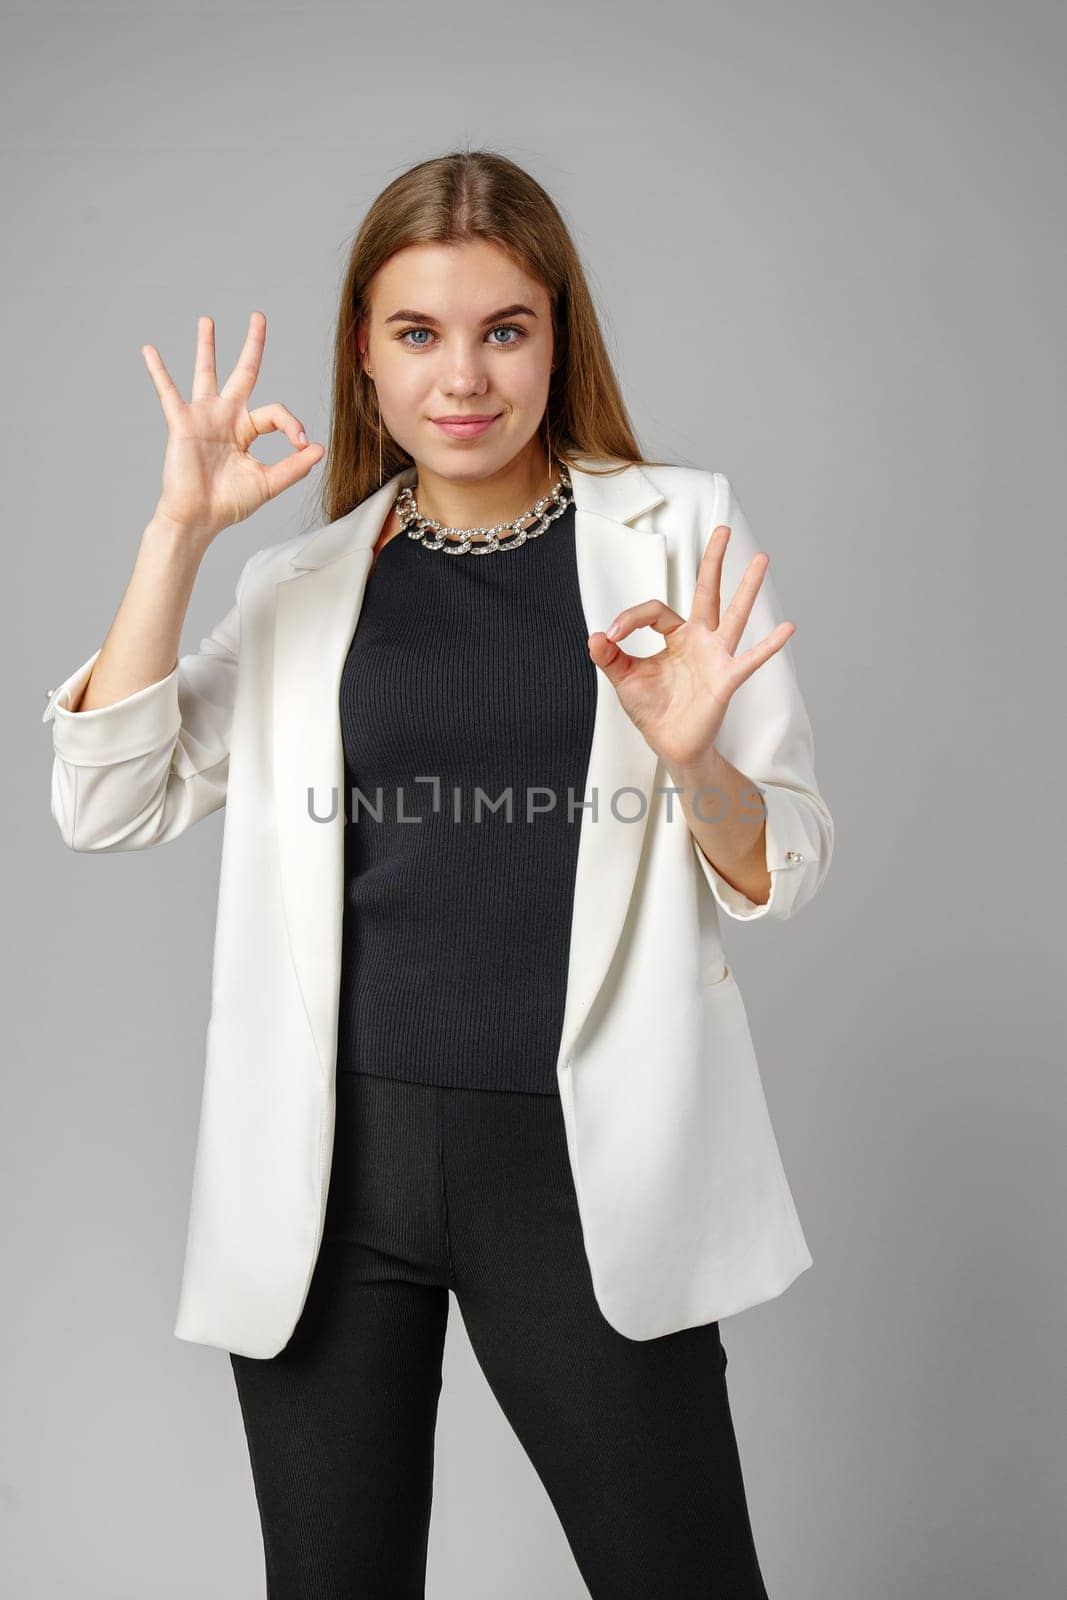 Confident Young Woman in Business Attire Giving Ok Sign in Studio Setting by Fabrikasimf